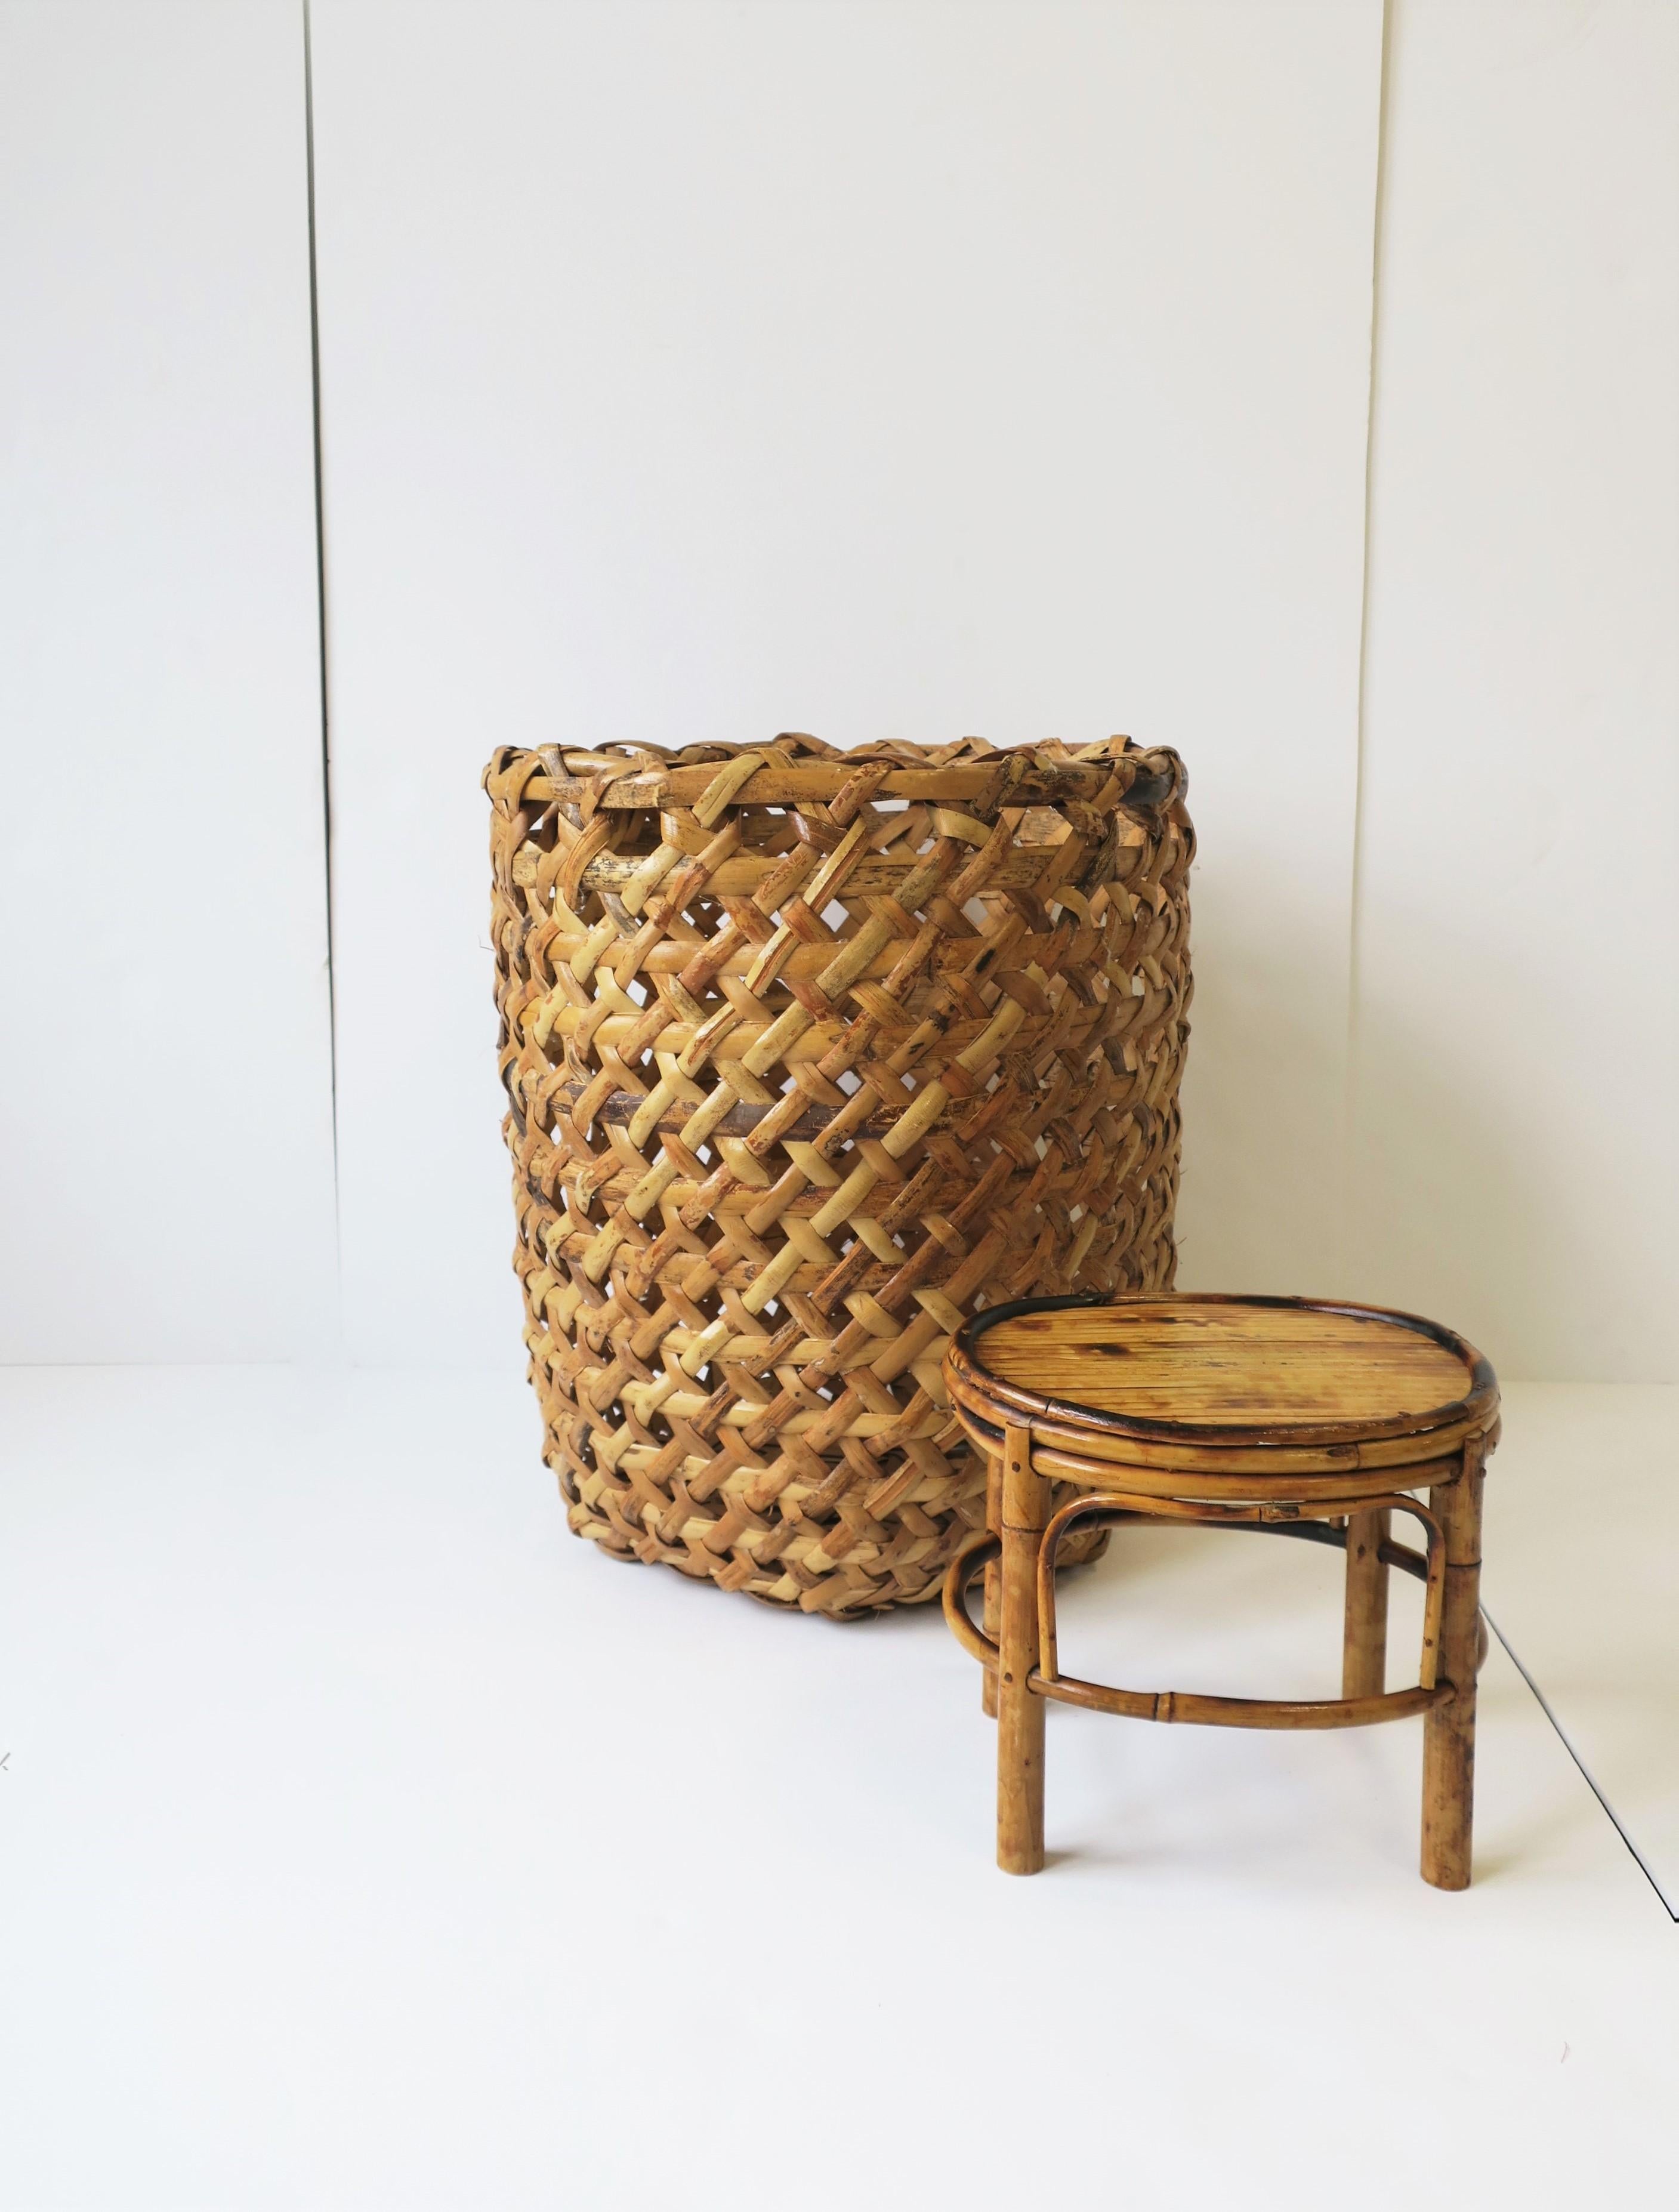 Wicker Bamboo Table or Plant Stand, Small In Good Condition For Sale In New York, NY